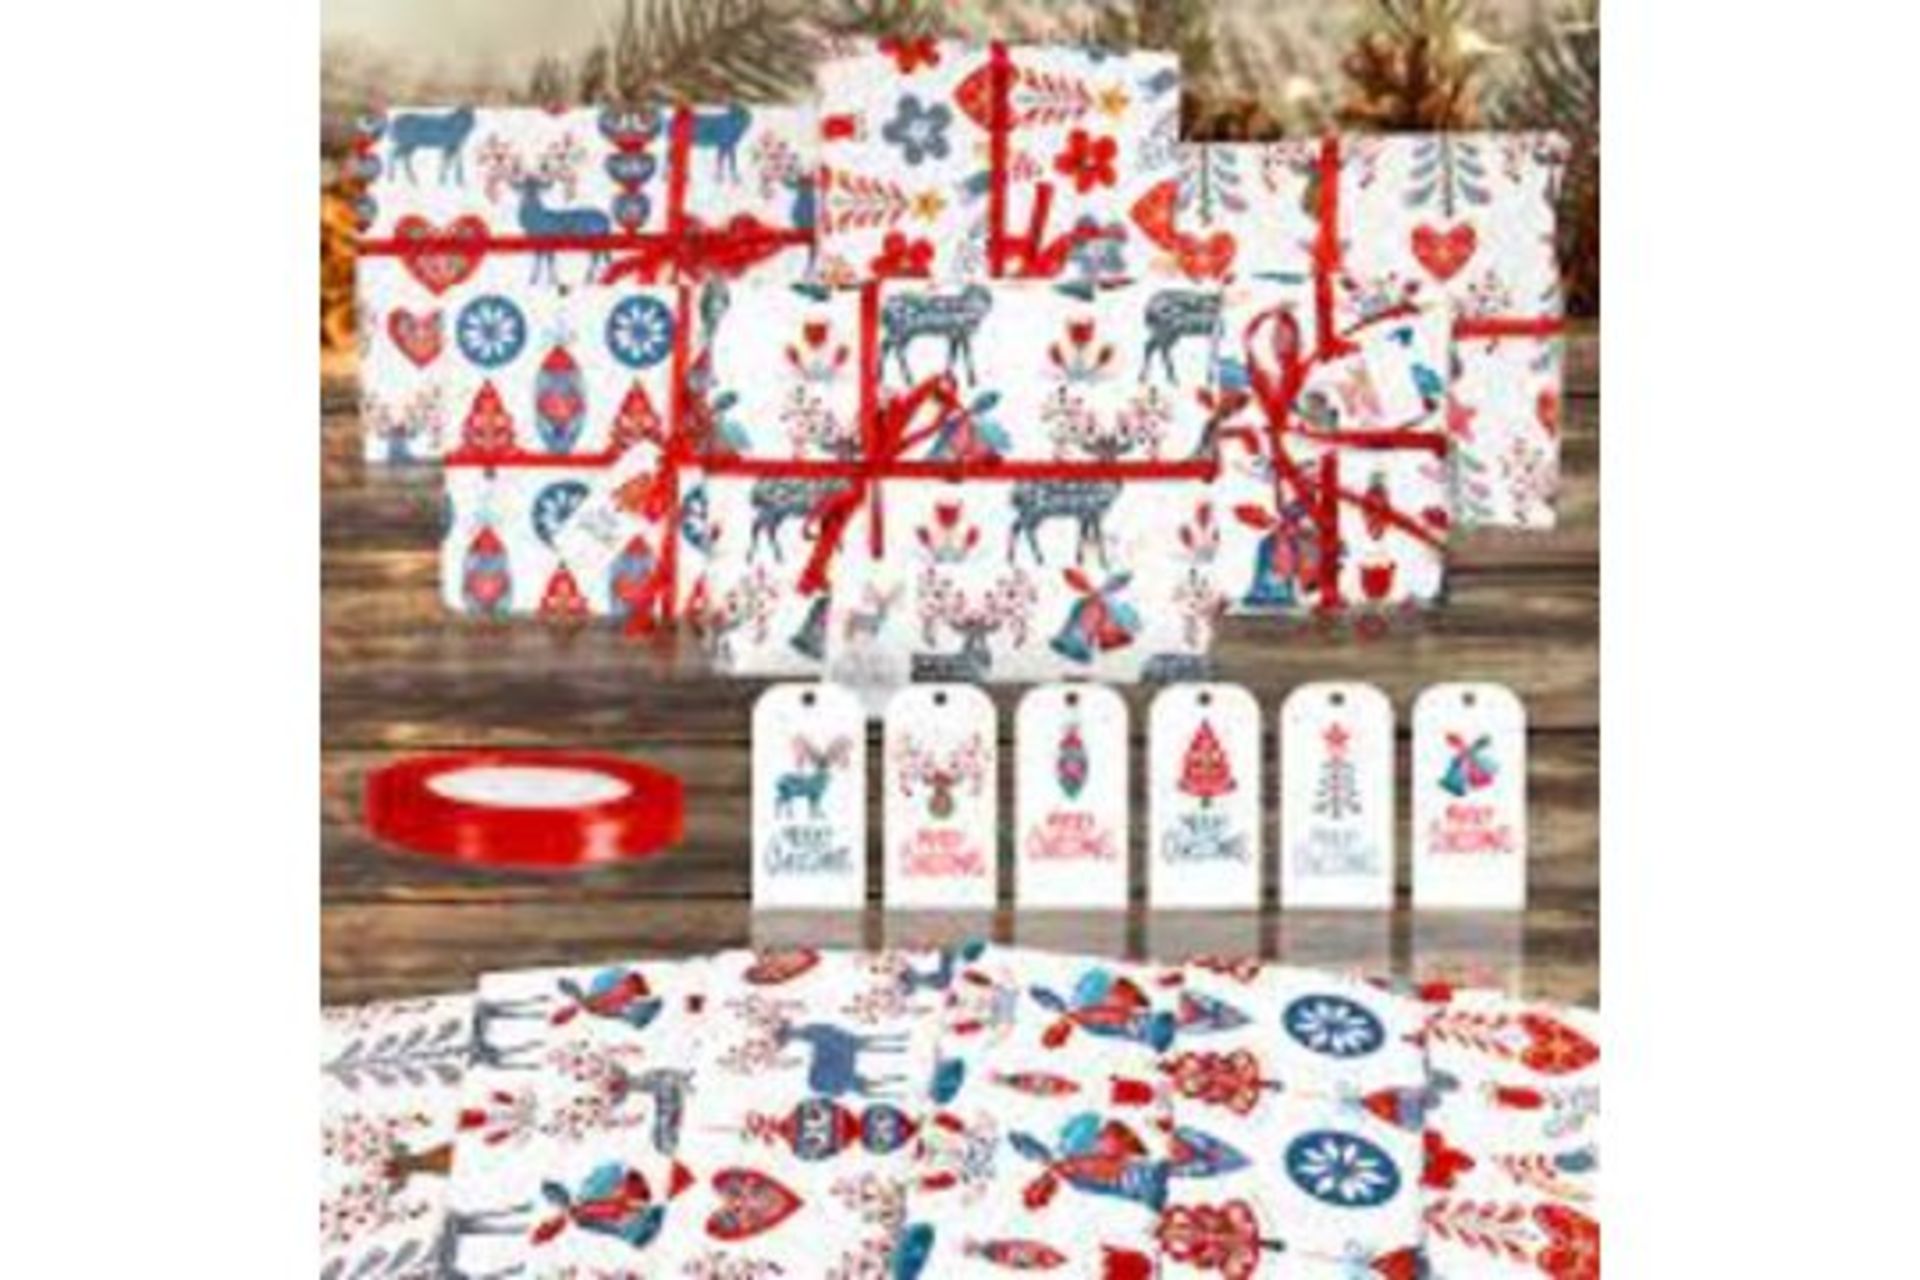 TRADE LOT 300 X BRAND NEW ASSORTED SETS OF 6 FOLDED SHEETS LUXURY CHRISTMAS WRAPPING PAPER SETS IN - Image 4 of 4